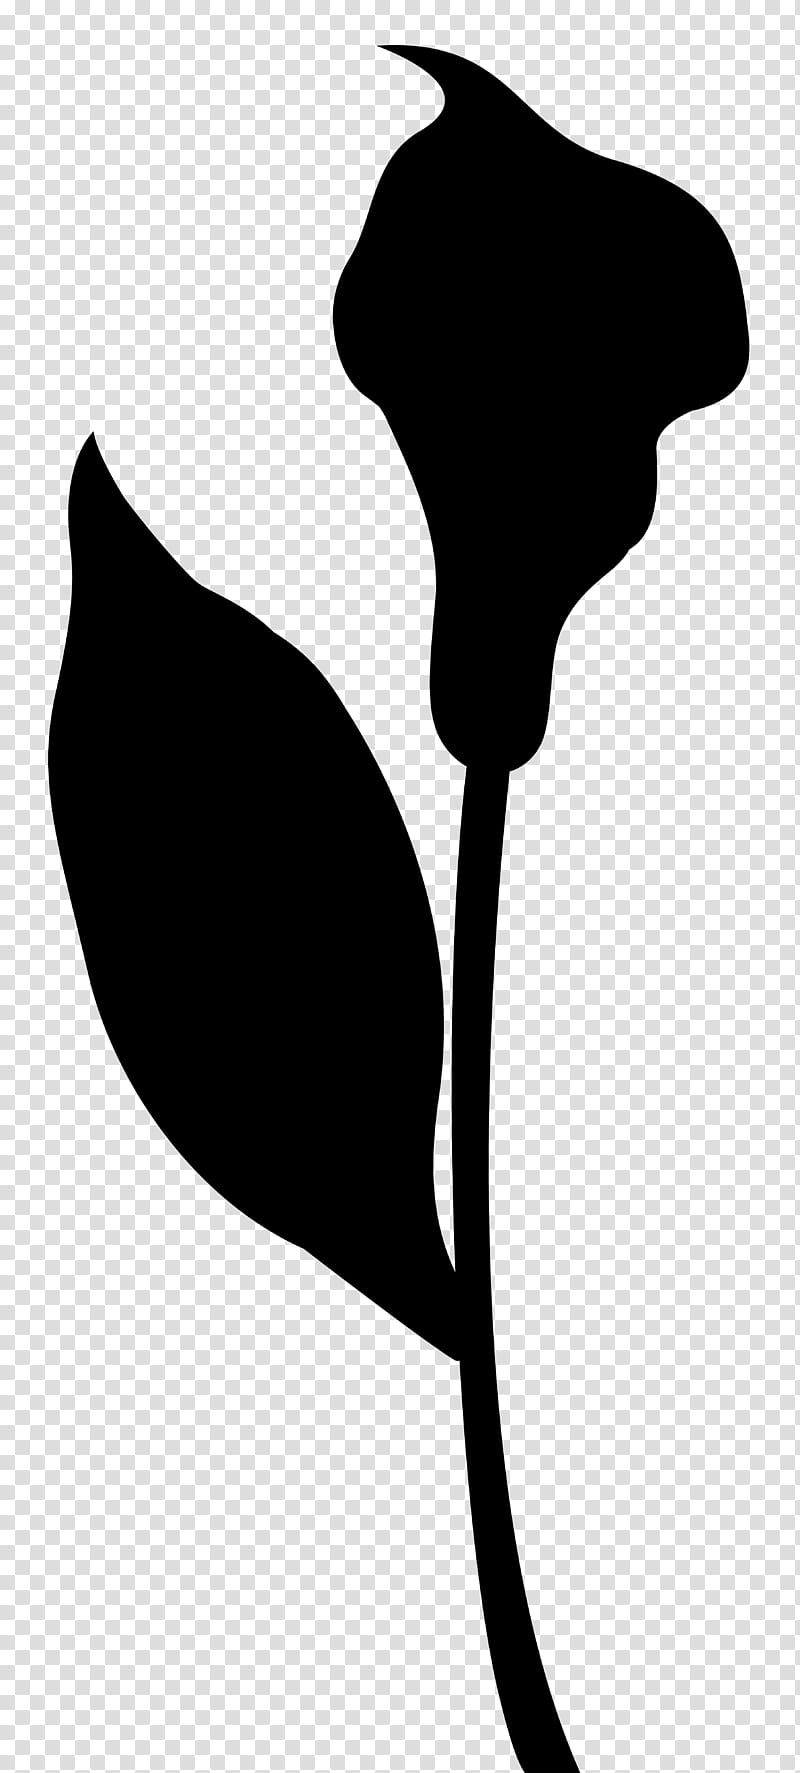 Family Tree Silhouette, Leaf, Line, Neck, Blackandwhite, Plant, Anthurium, Arum Family transparent background PNG clipart